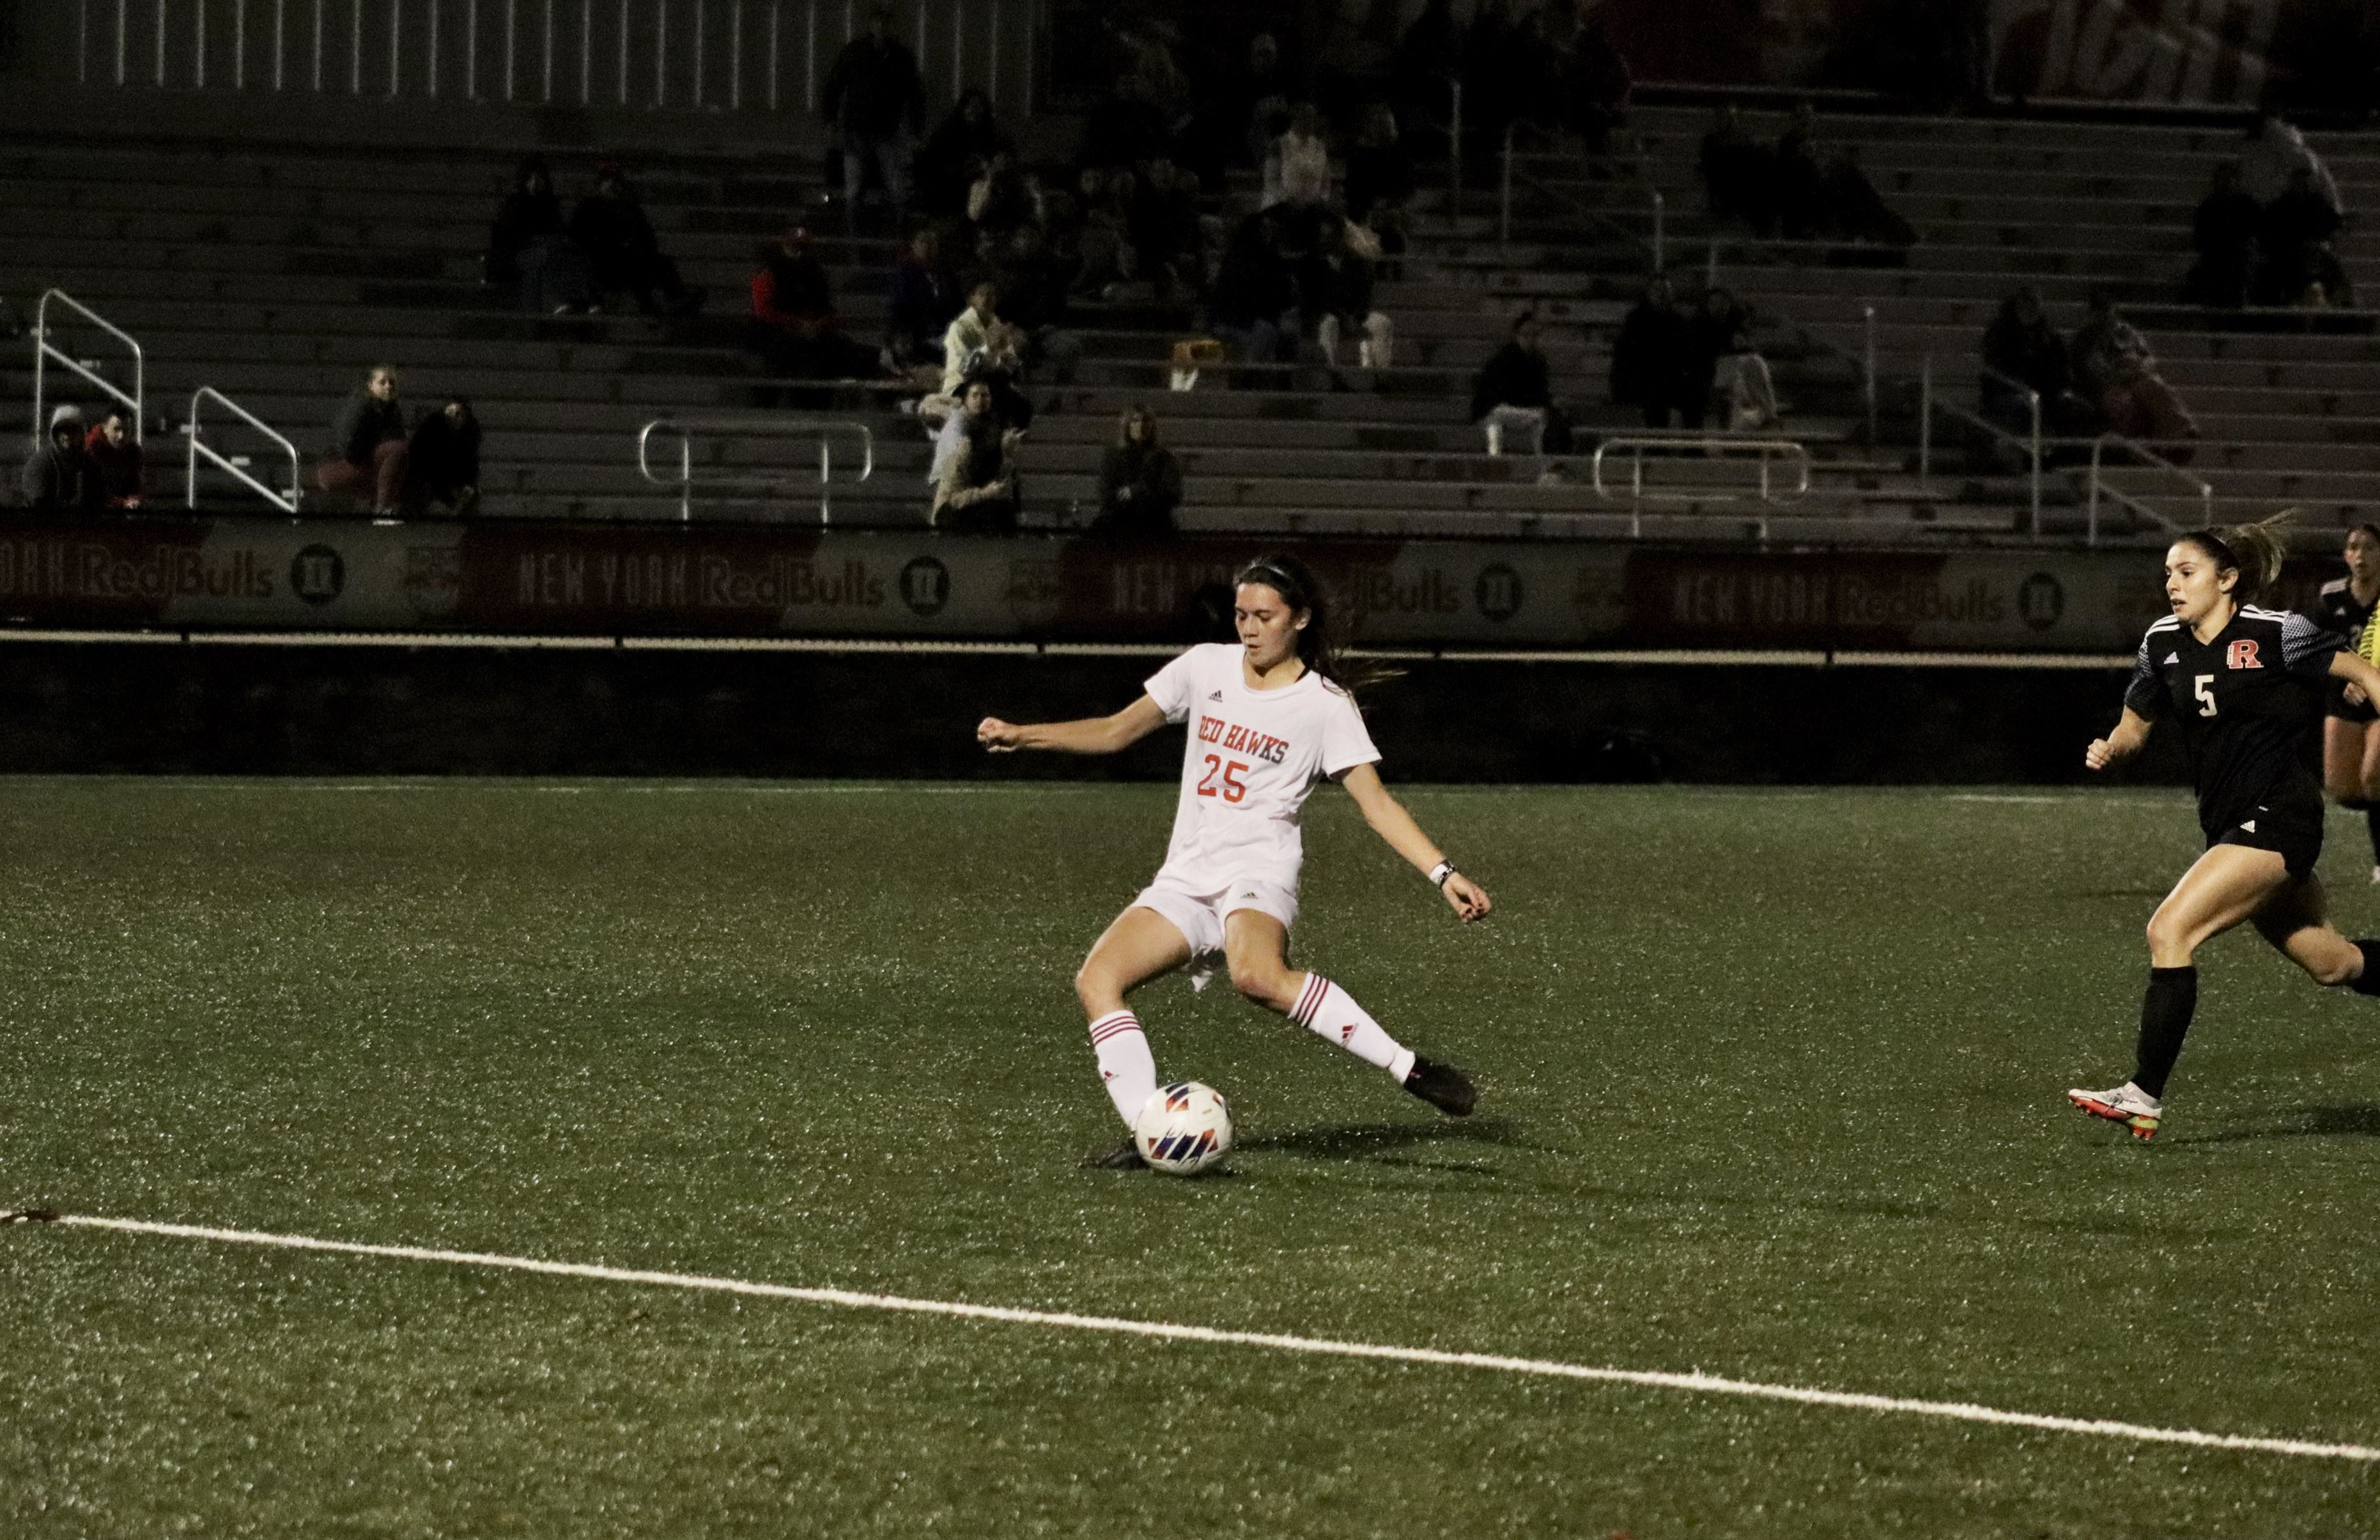 Freshman Kylie Prendergast may not have gotten a ball in the net, but she did assist Cahill on one of her goals against the Scarlet Raiders. Trevor Giesberg | The Montclarion